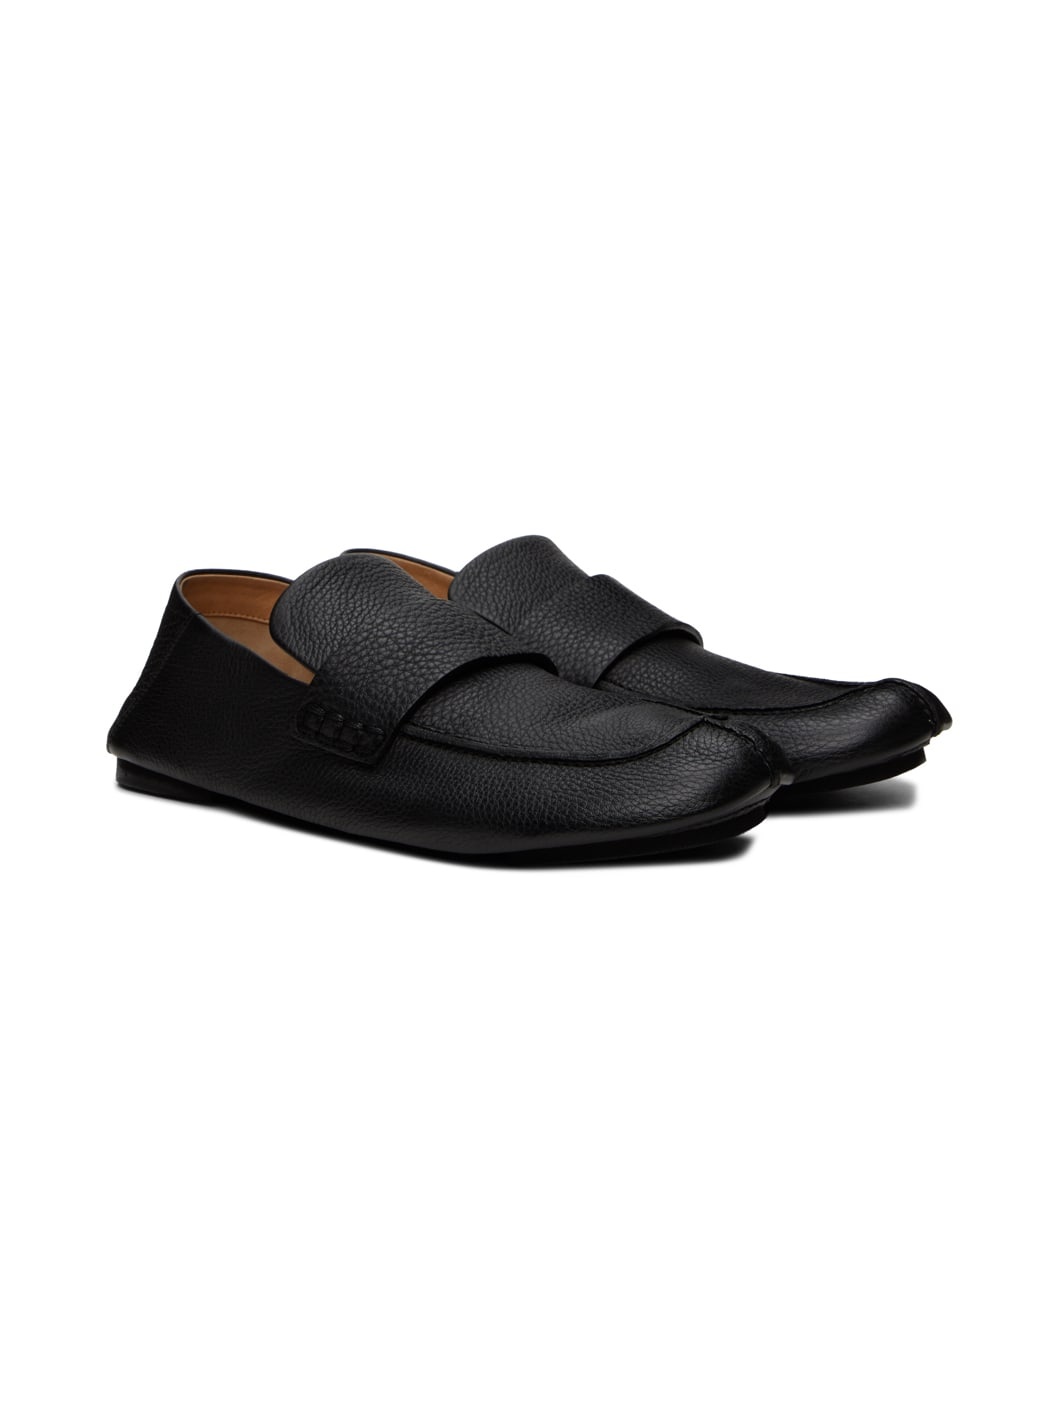 Black Toddone Loafers - 4